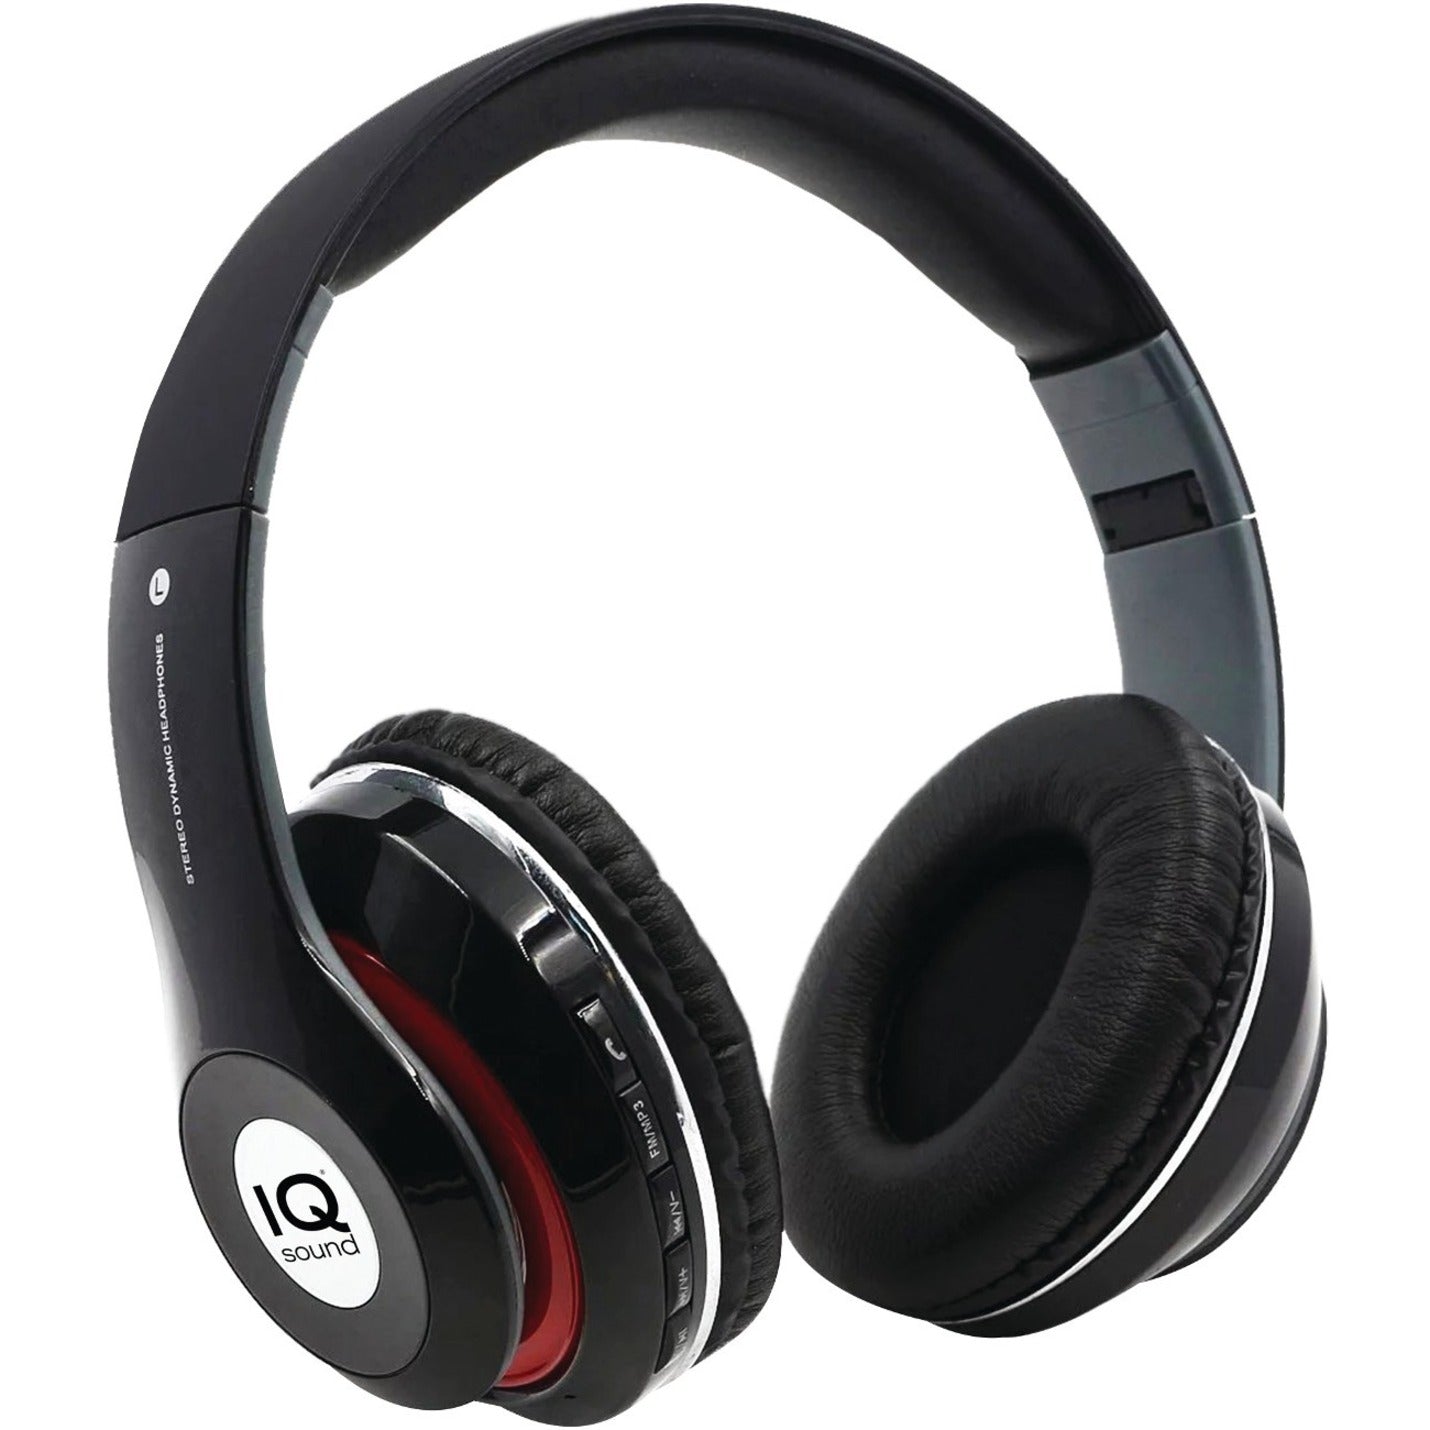 IQ Sound IQ-130BT- BLK Bluetooth Wireless Headphones and Mic, Over-the-head, Noise Reduction, 90 Day Warranty